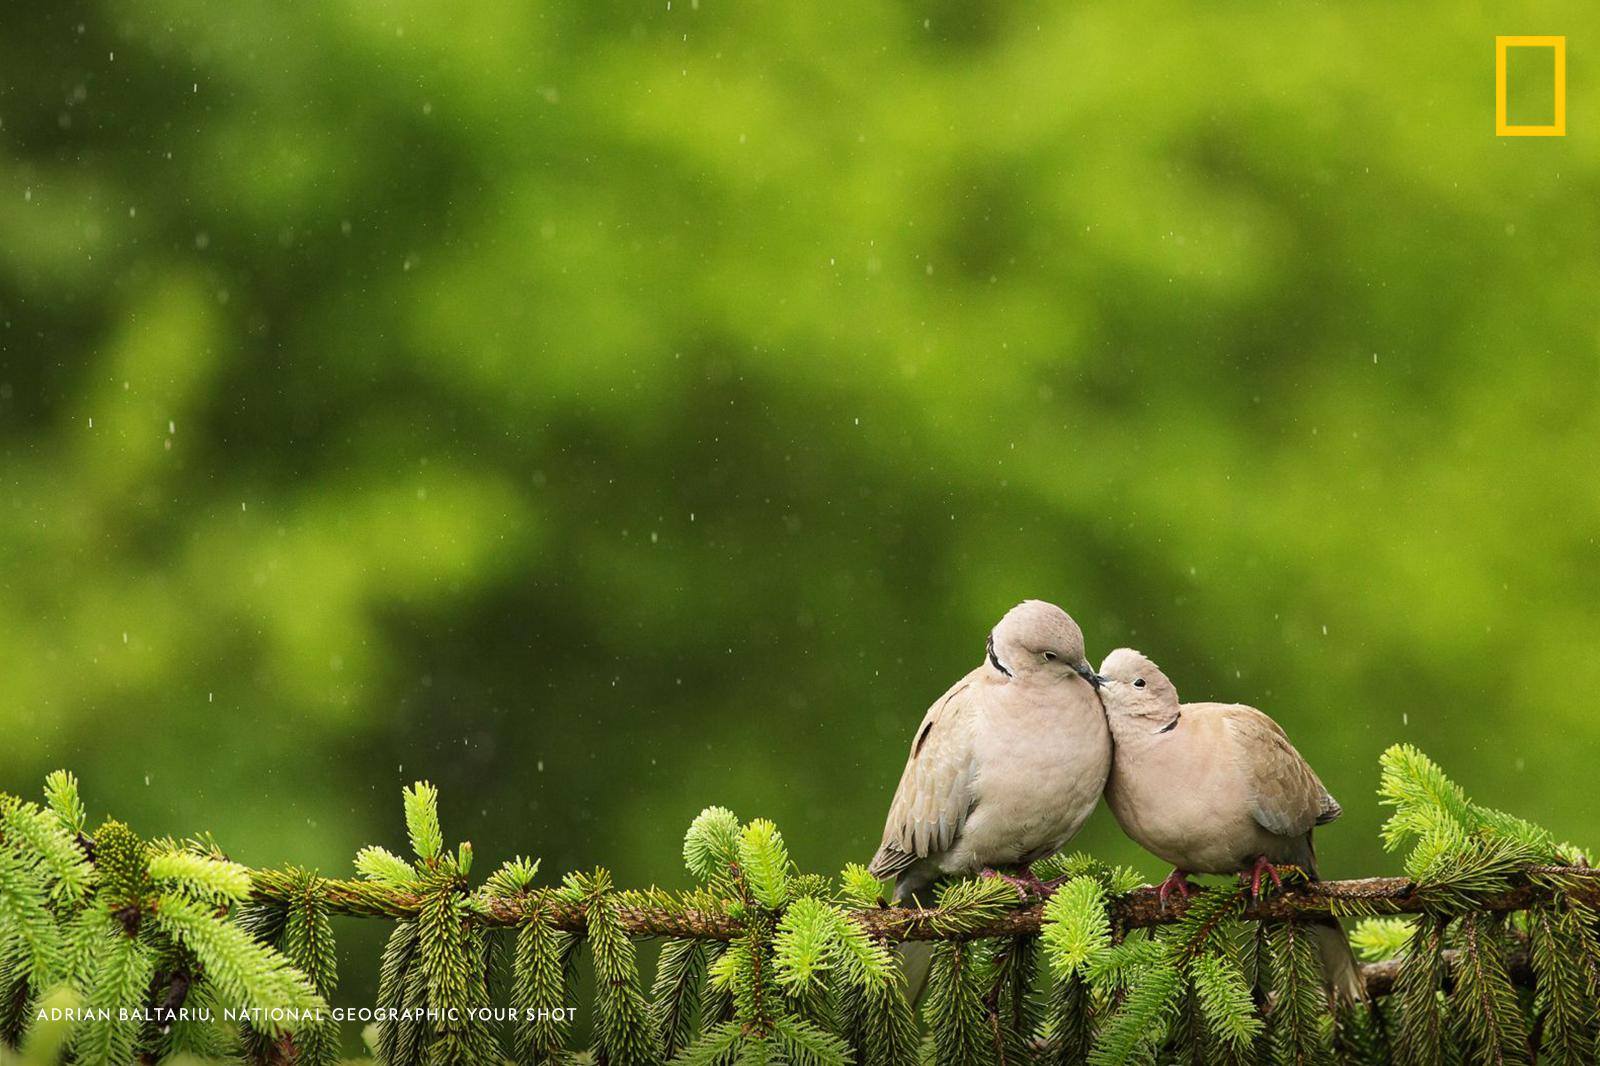 Your Shot Photographer Adrian Baltariu captured this wonderful moment of two doves cuddling on a tree branch in the rain. https://on.natgeo.com/2XxfYEu